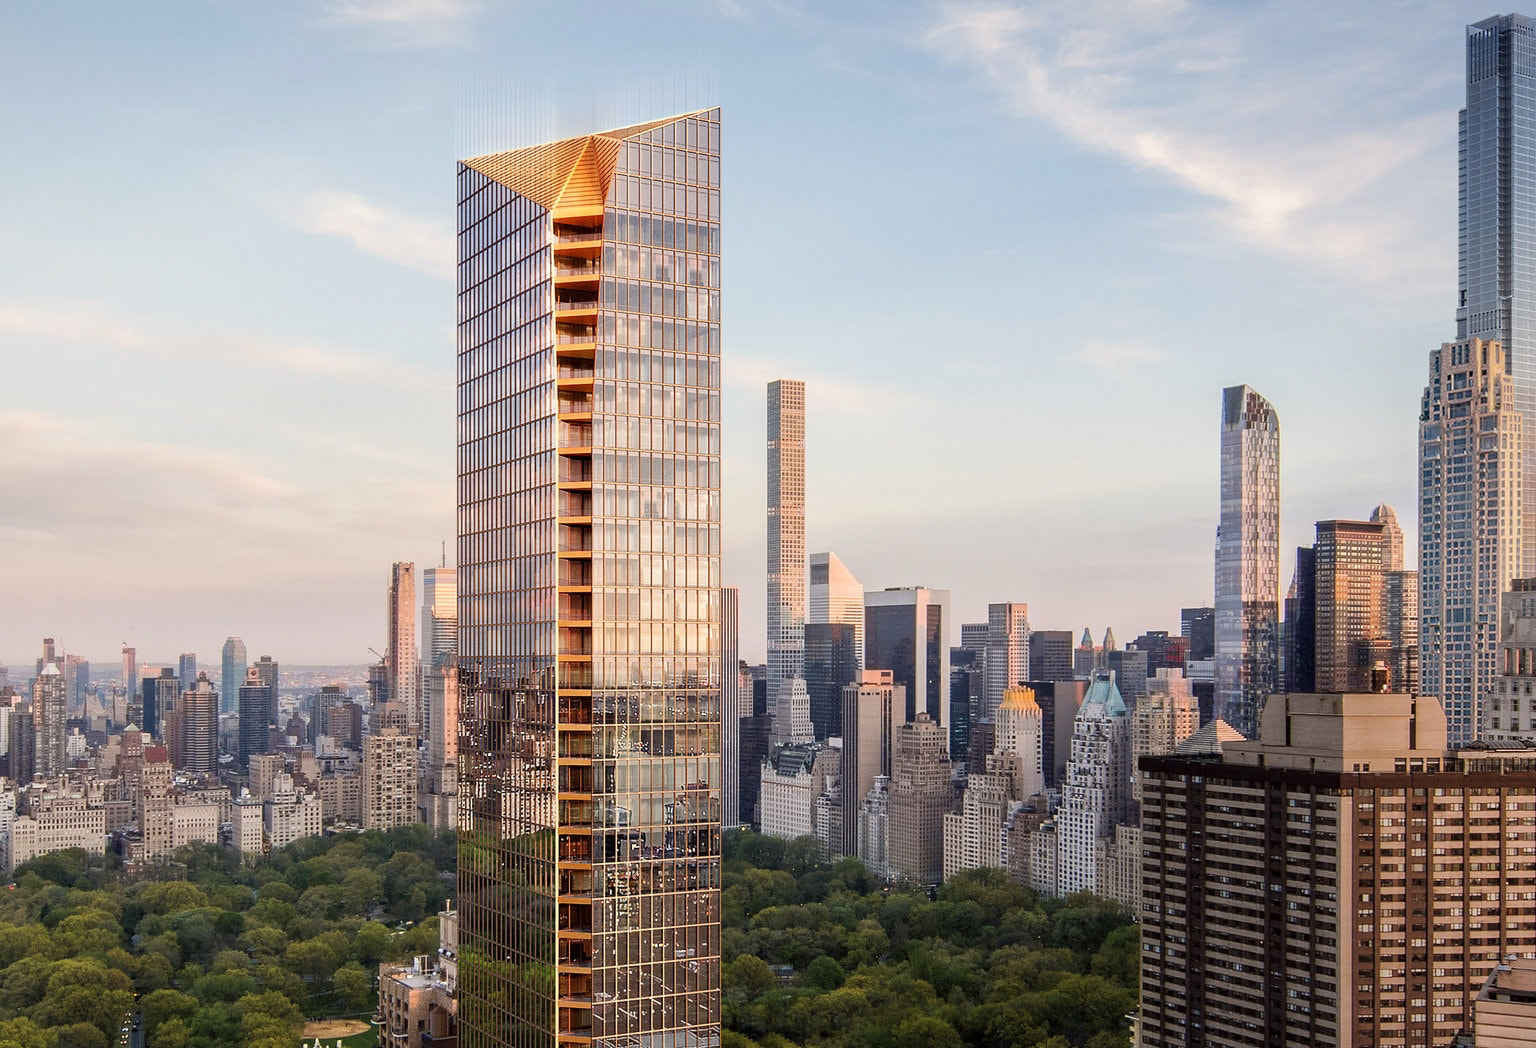 A rendering of a skinny glass tower on the Upper West Side with Central Park and the Upper East Side in the background.